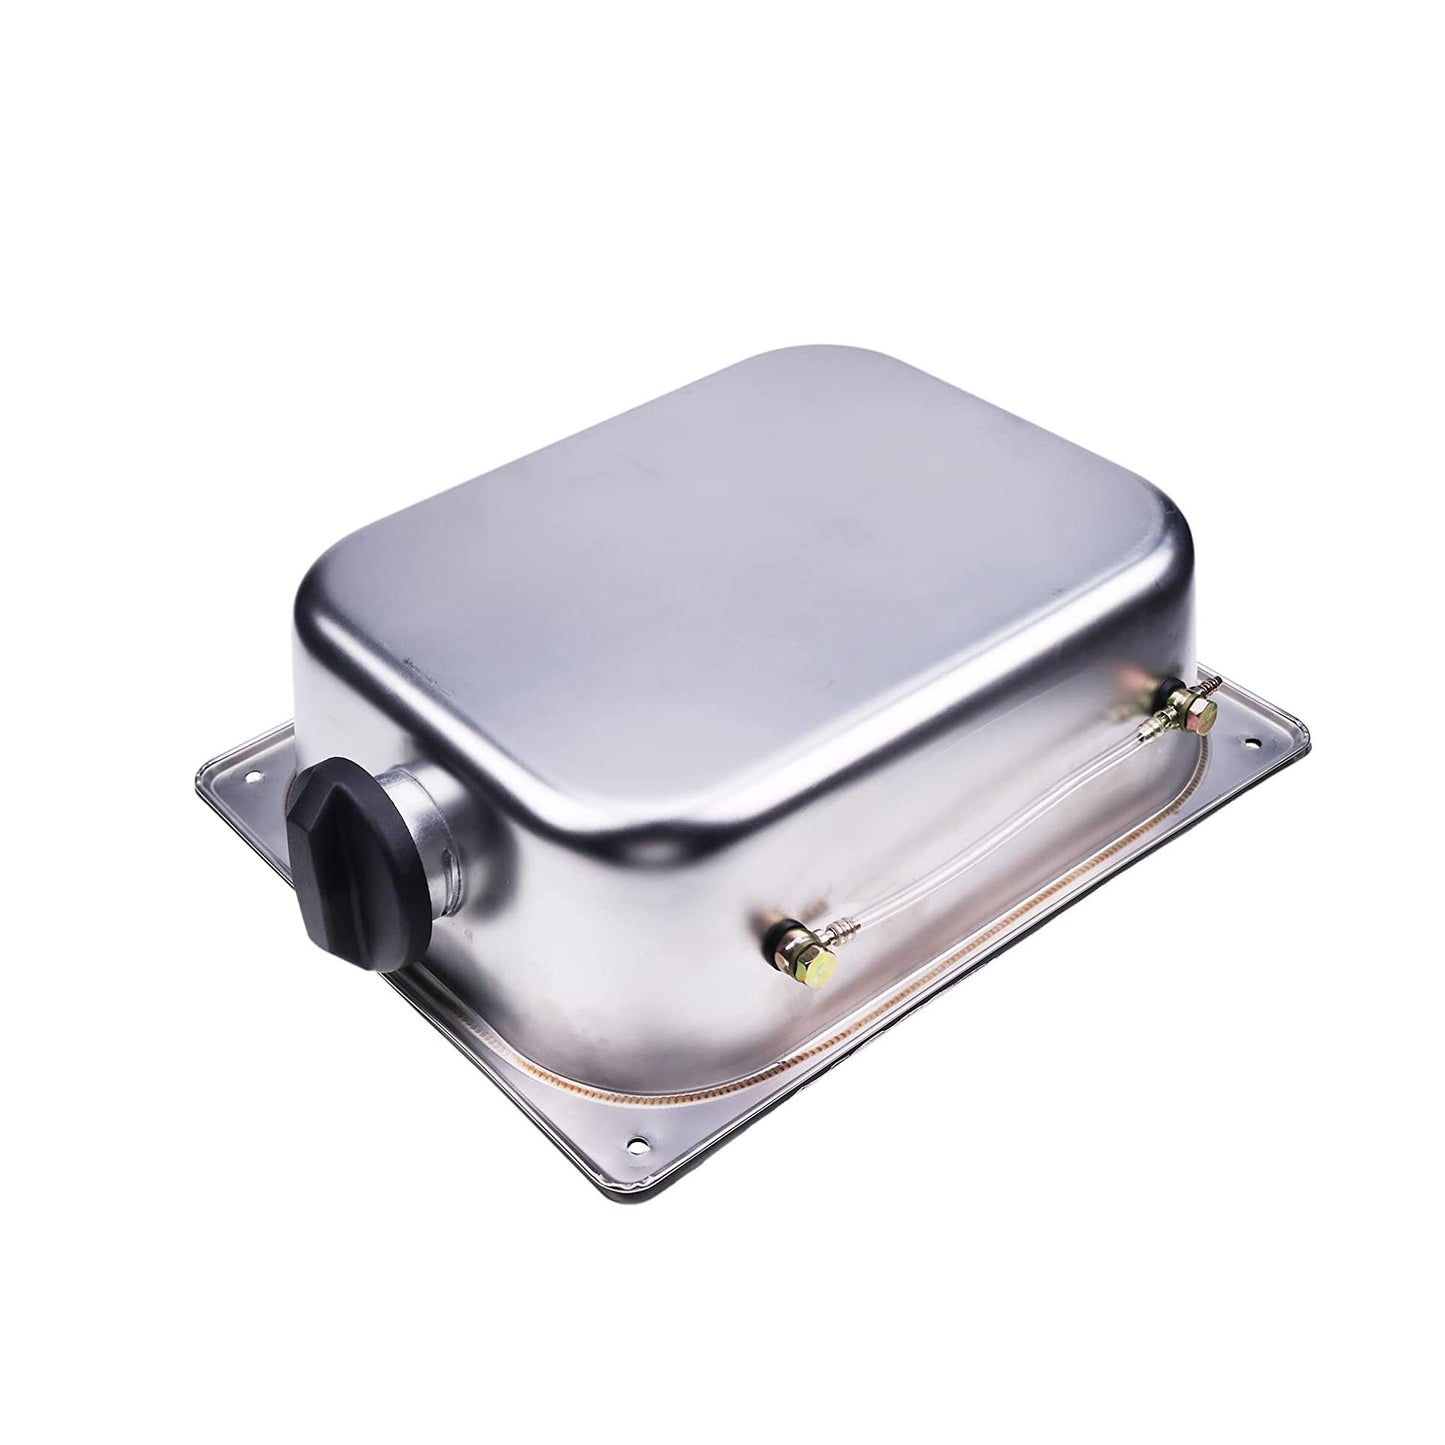 New 8L 8-Litre Stainless Steel Diesel Gasoline Petrol Fuel Tank Can Assembly Universal Fitment for Webasto/Eberspacher Parking Heater Diesel Engines